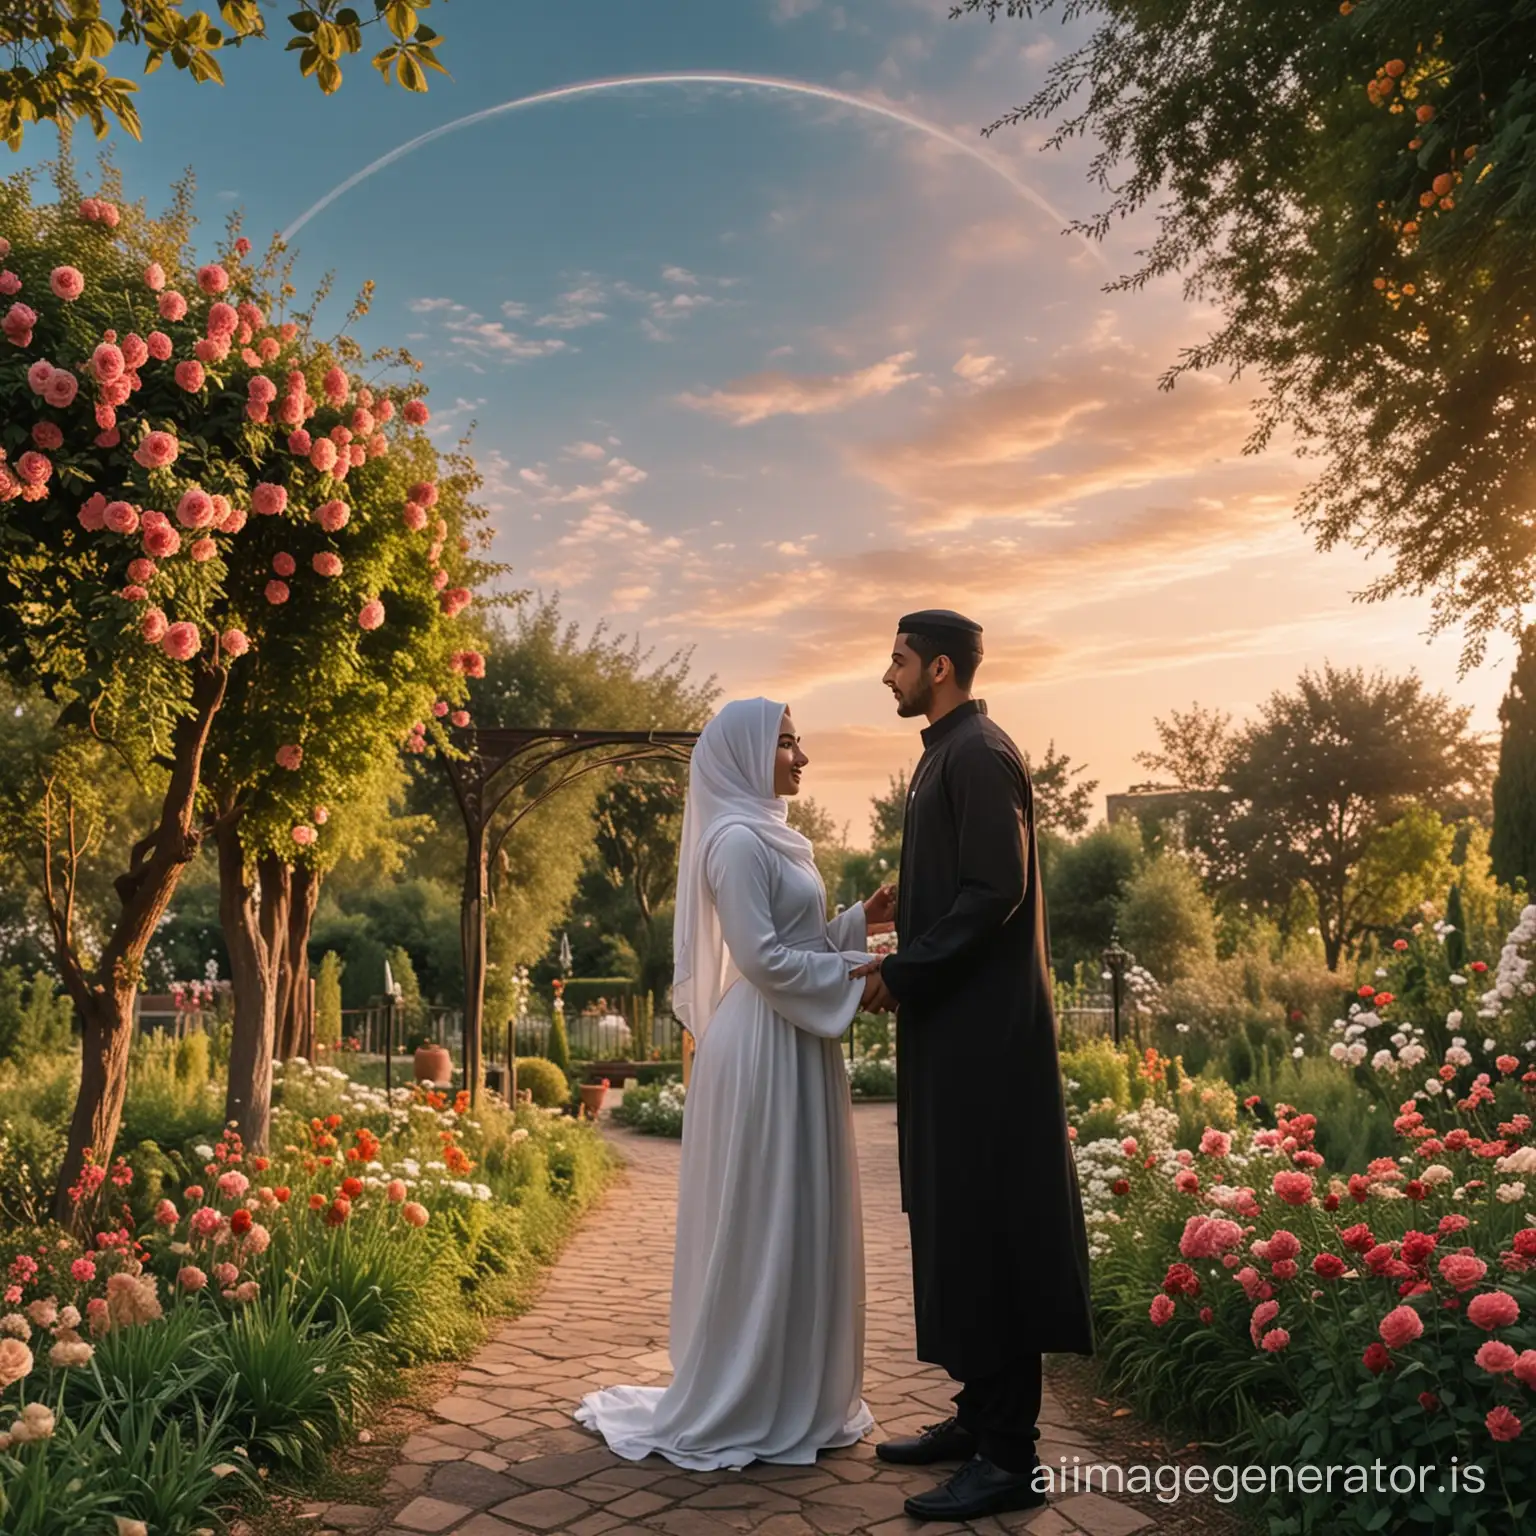 A beautiful hijabi girl is standing in a garden with a beautiful Muslim boy in a hijab and there is an arc in the sky.